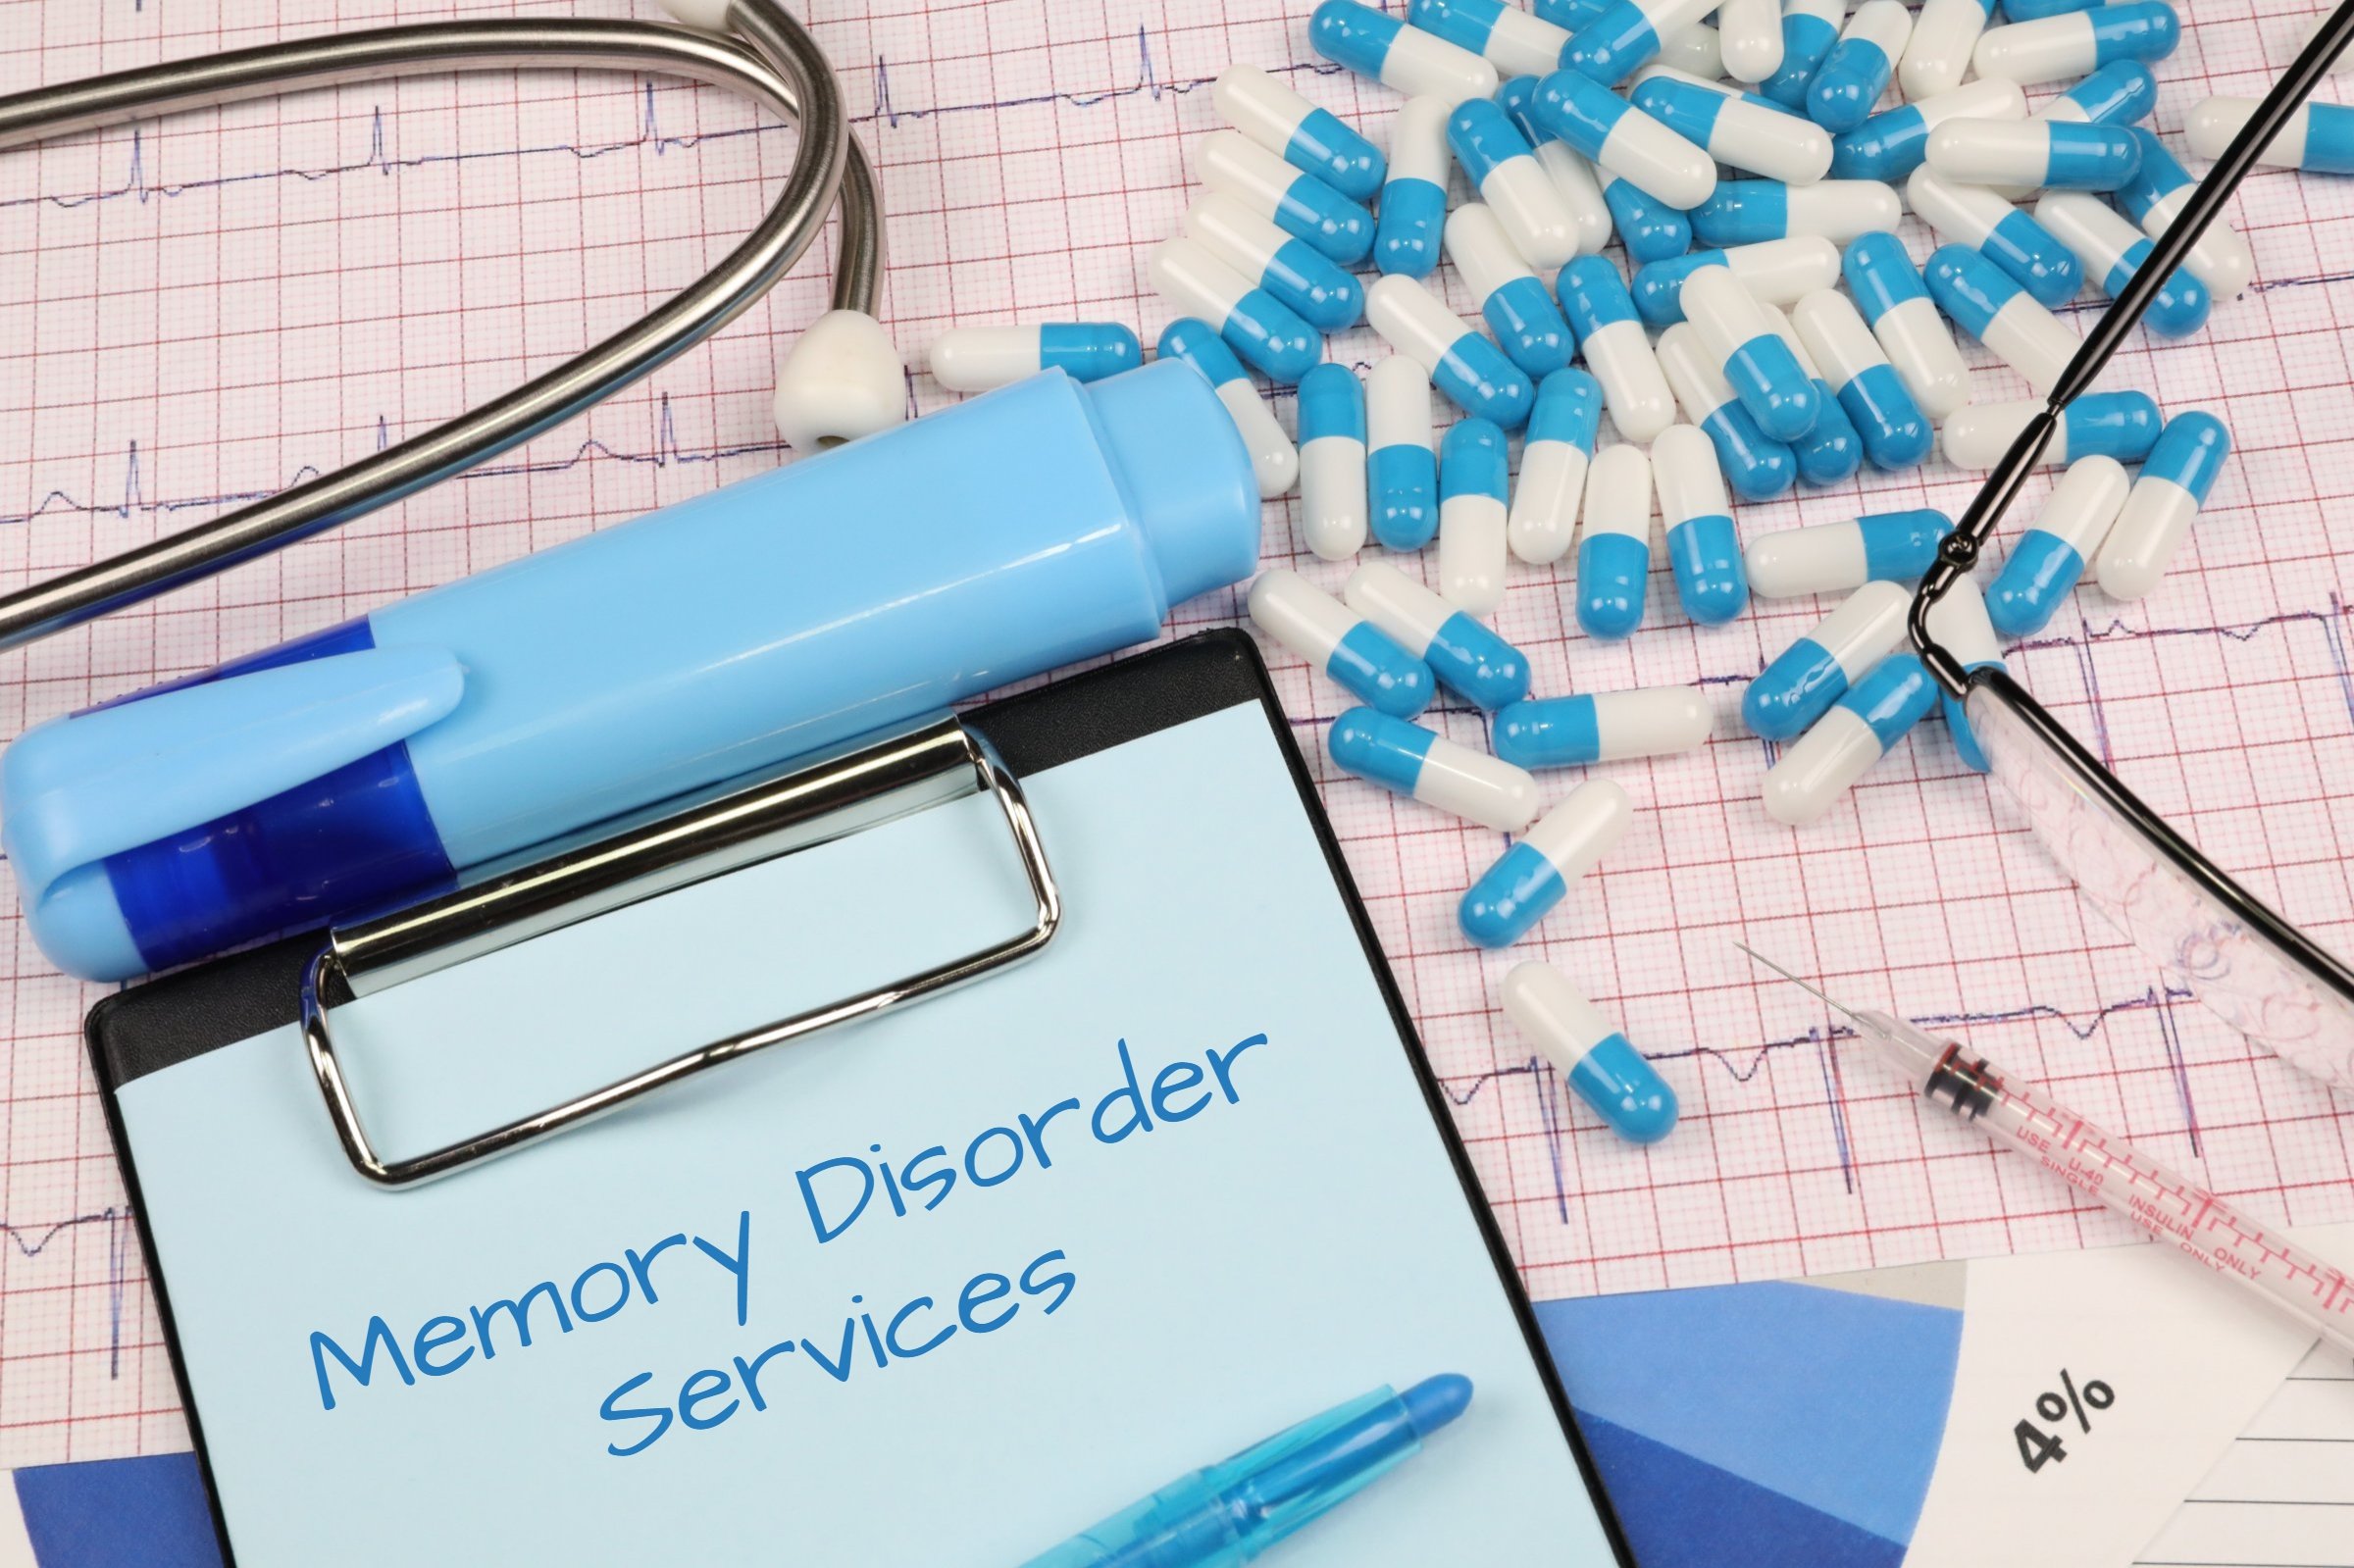 memory disorder services